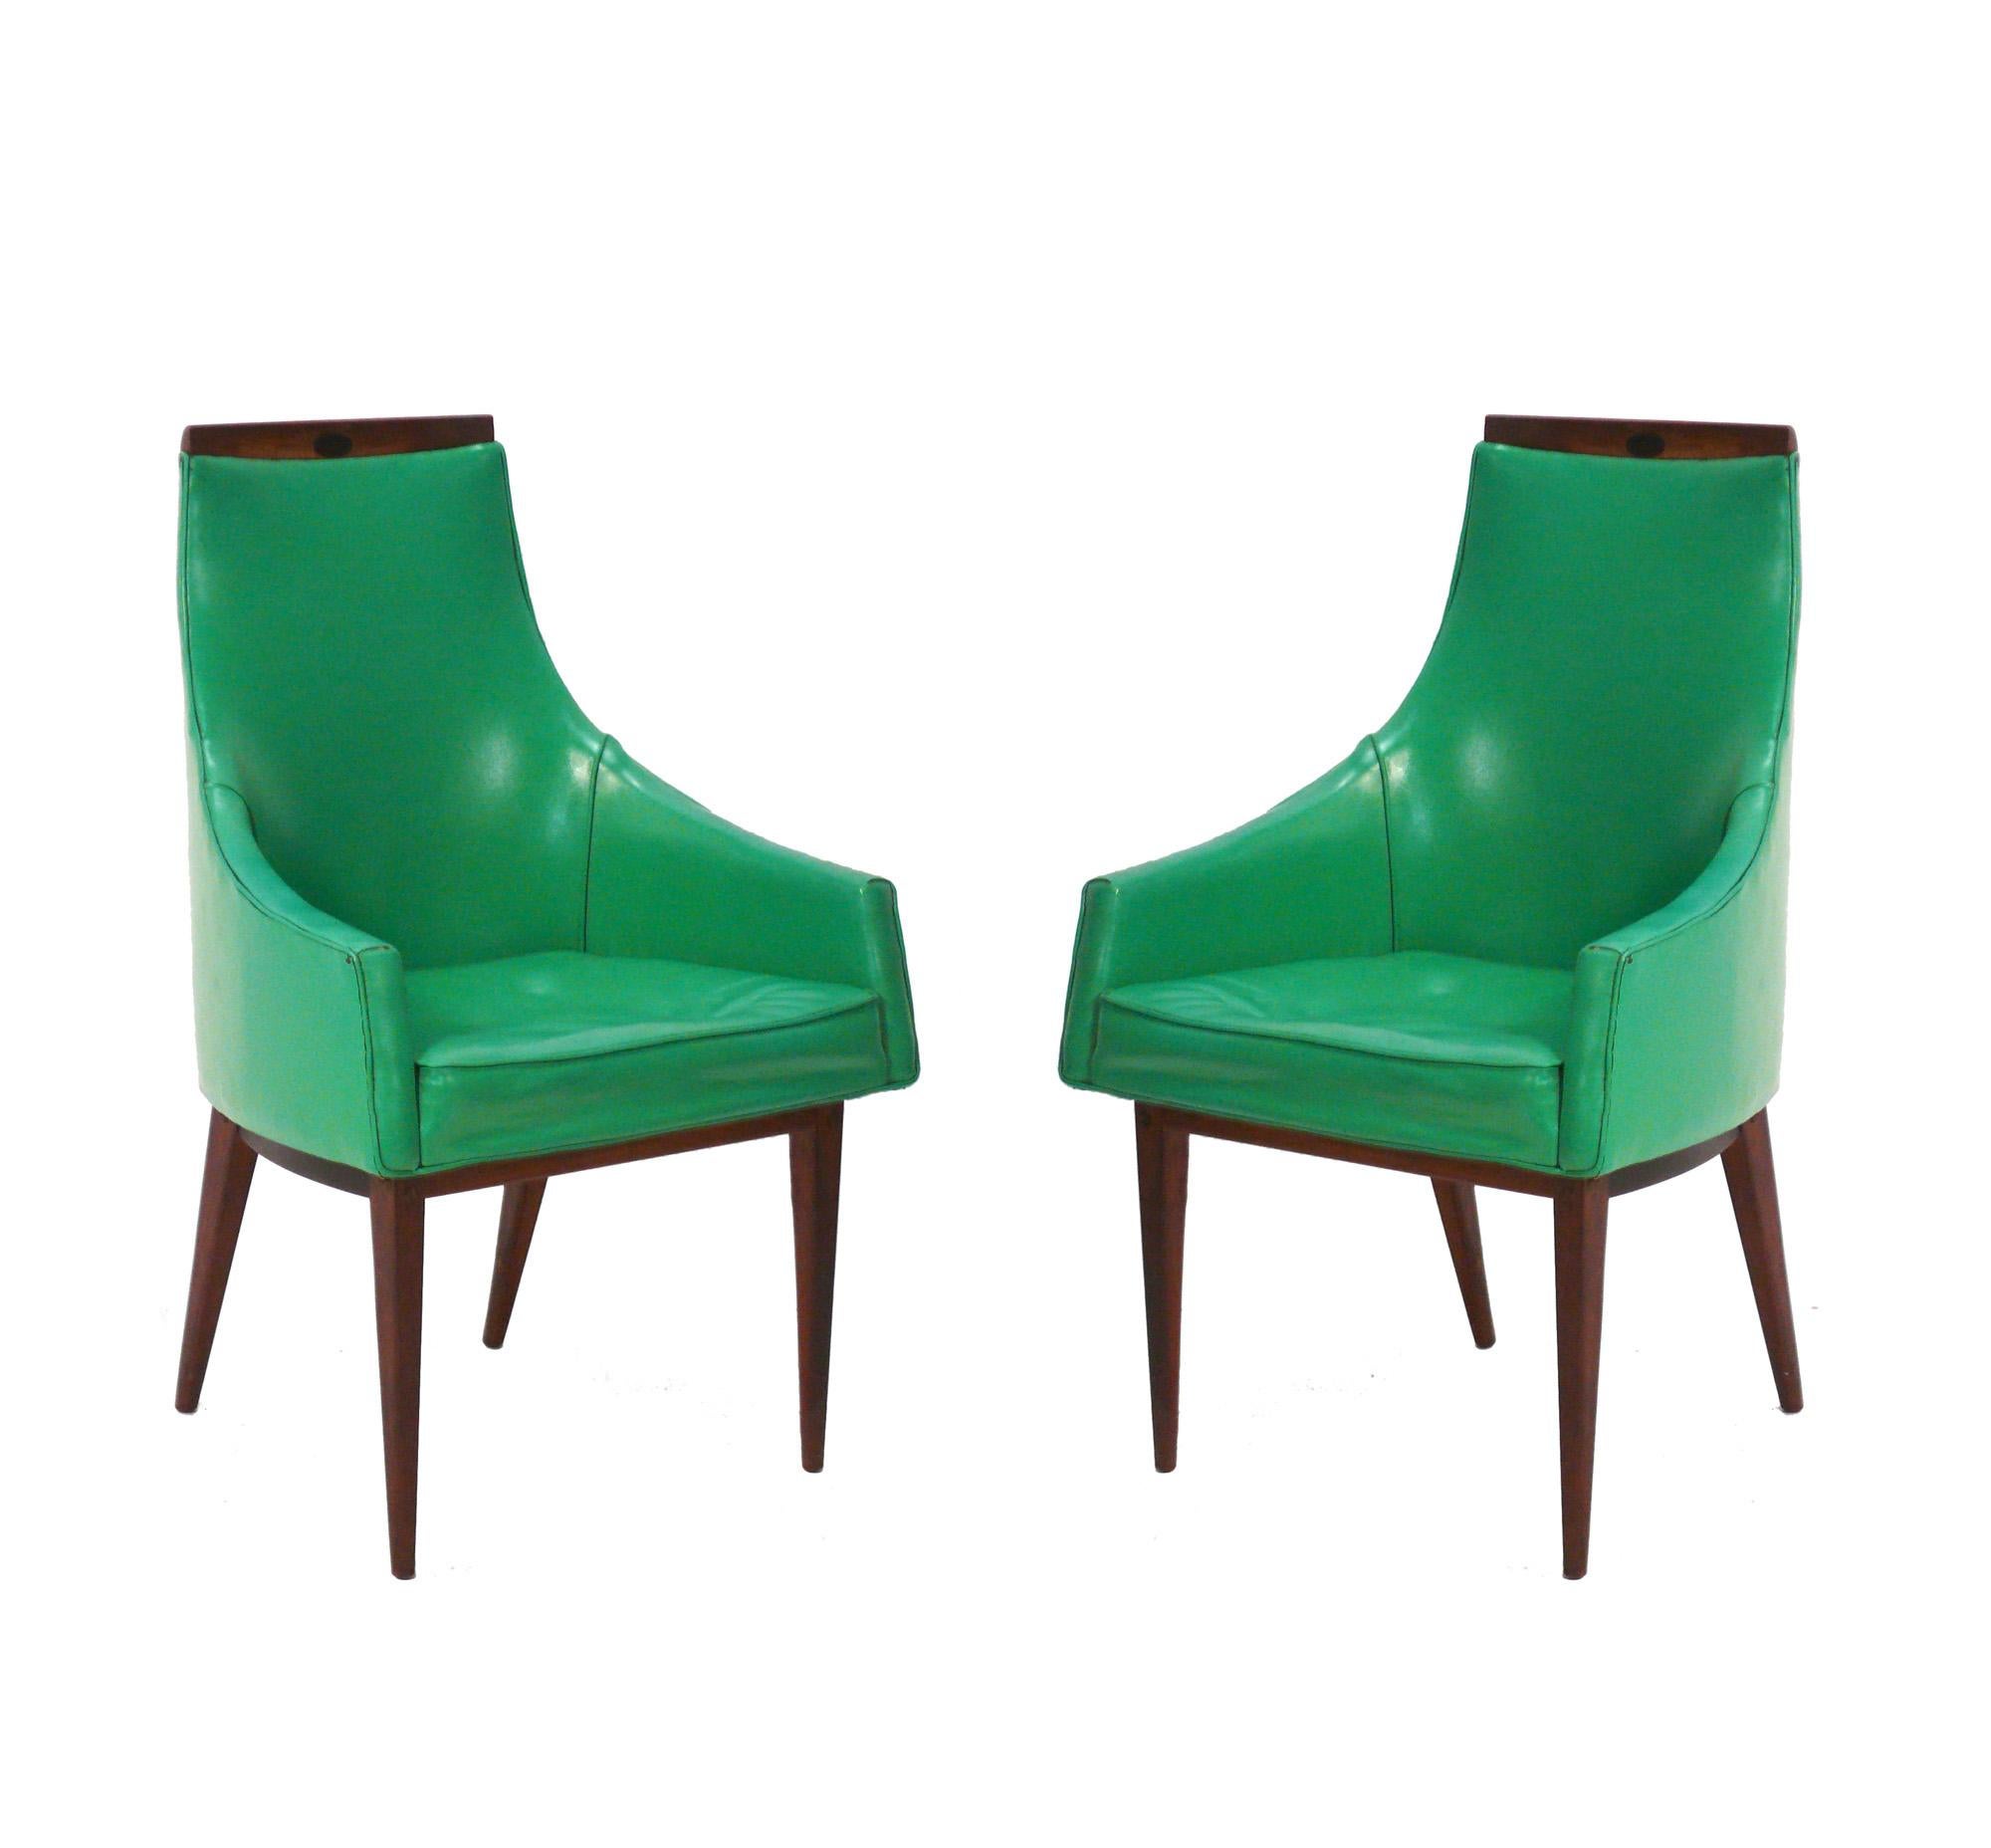 Set of Eight Curvaceous Dining Chairs, designed by Kipp Stewart for Calvin, American, circa 1960s. These chairs are currently being refinished and reupholstered, and can be completed in your choice of finish color and reupholstered in your fabric.